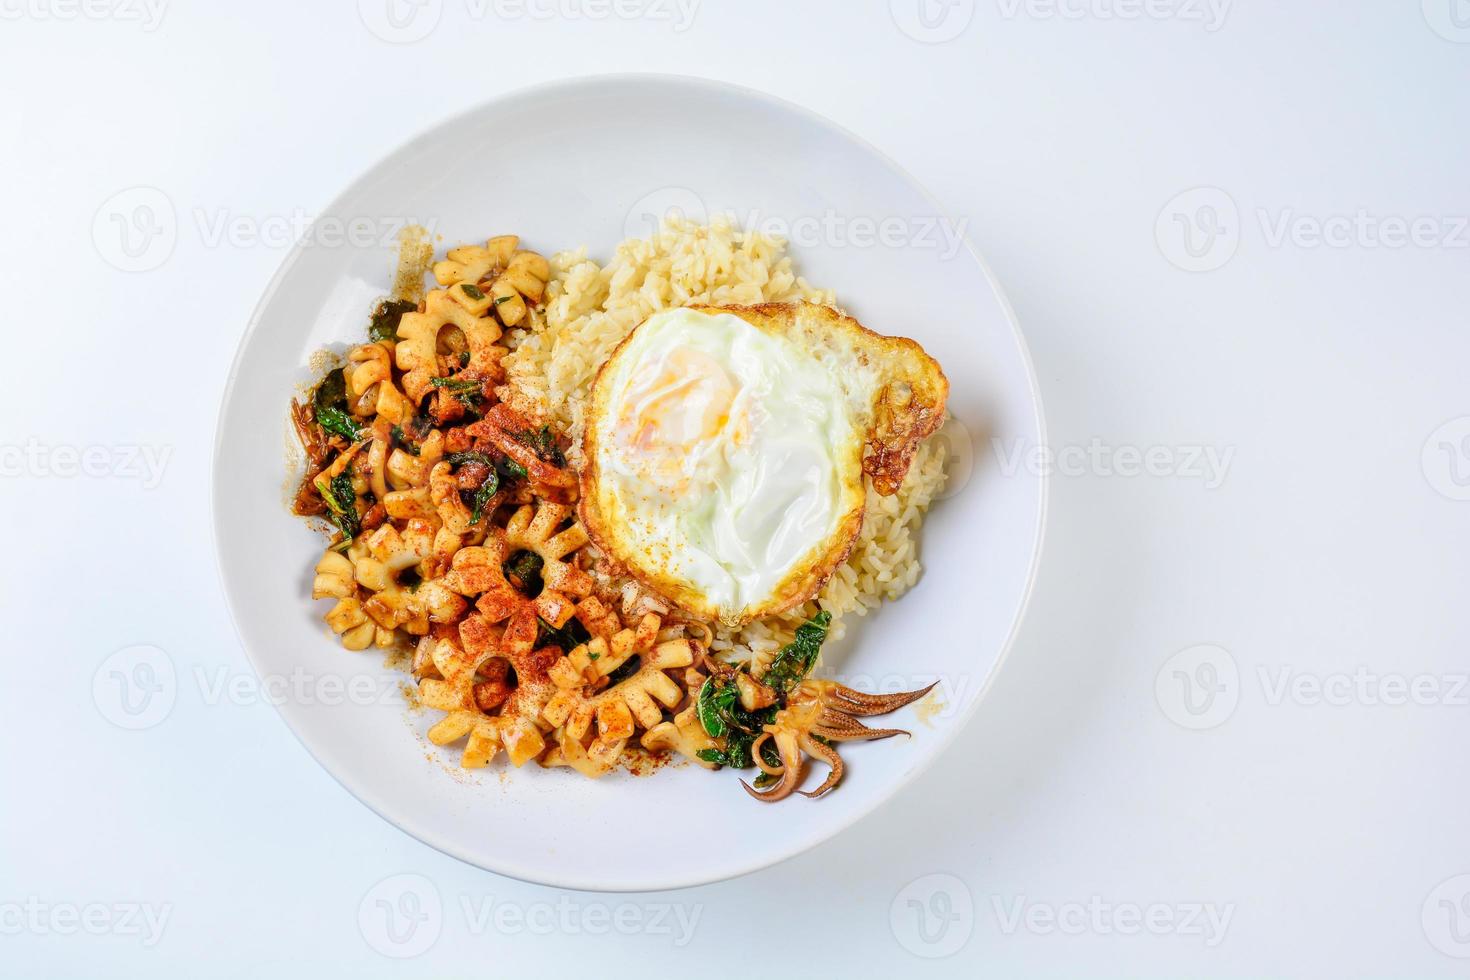 Spicy stir fried squid with basil leaves and chili, Sunny side up egg, served with brown rice. Hot and spicy dish. photo